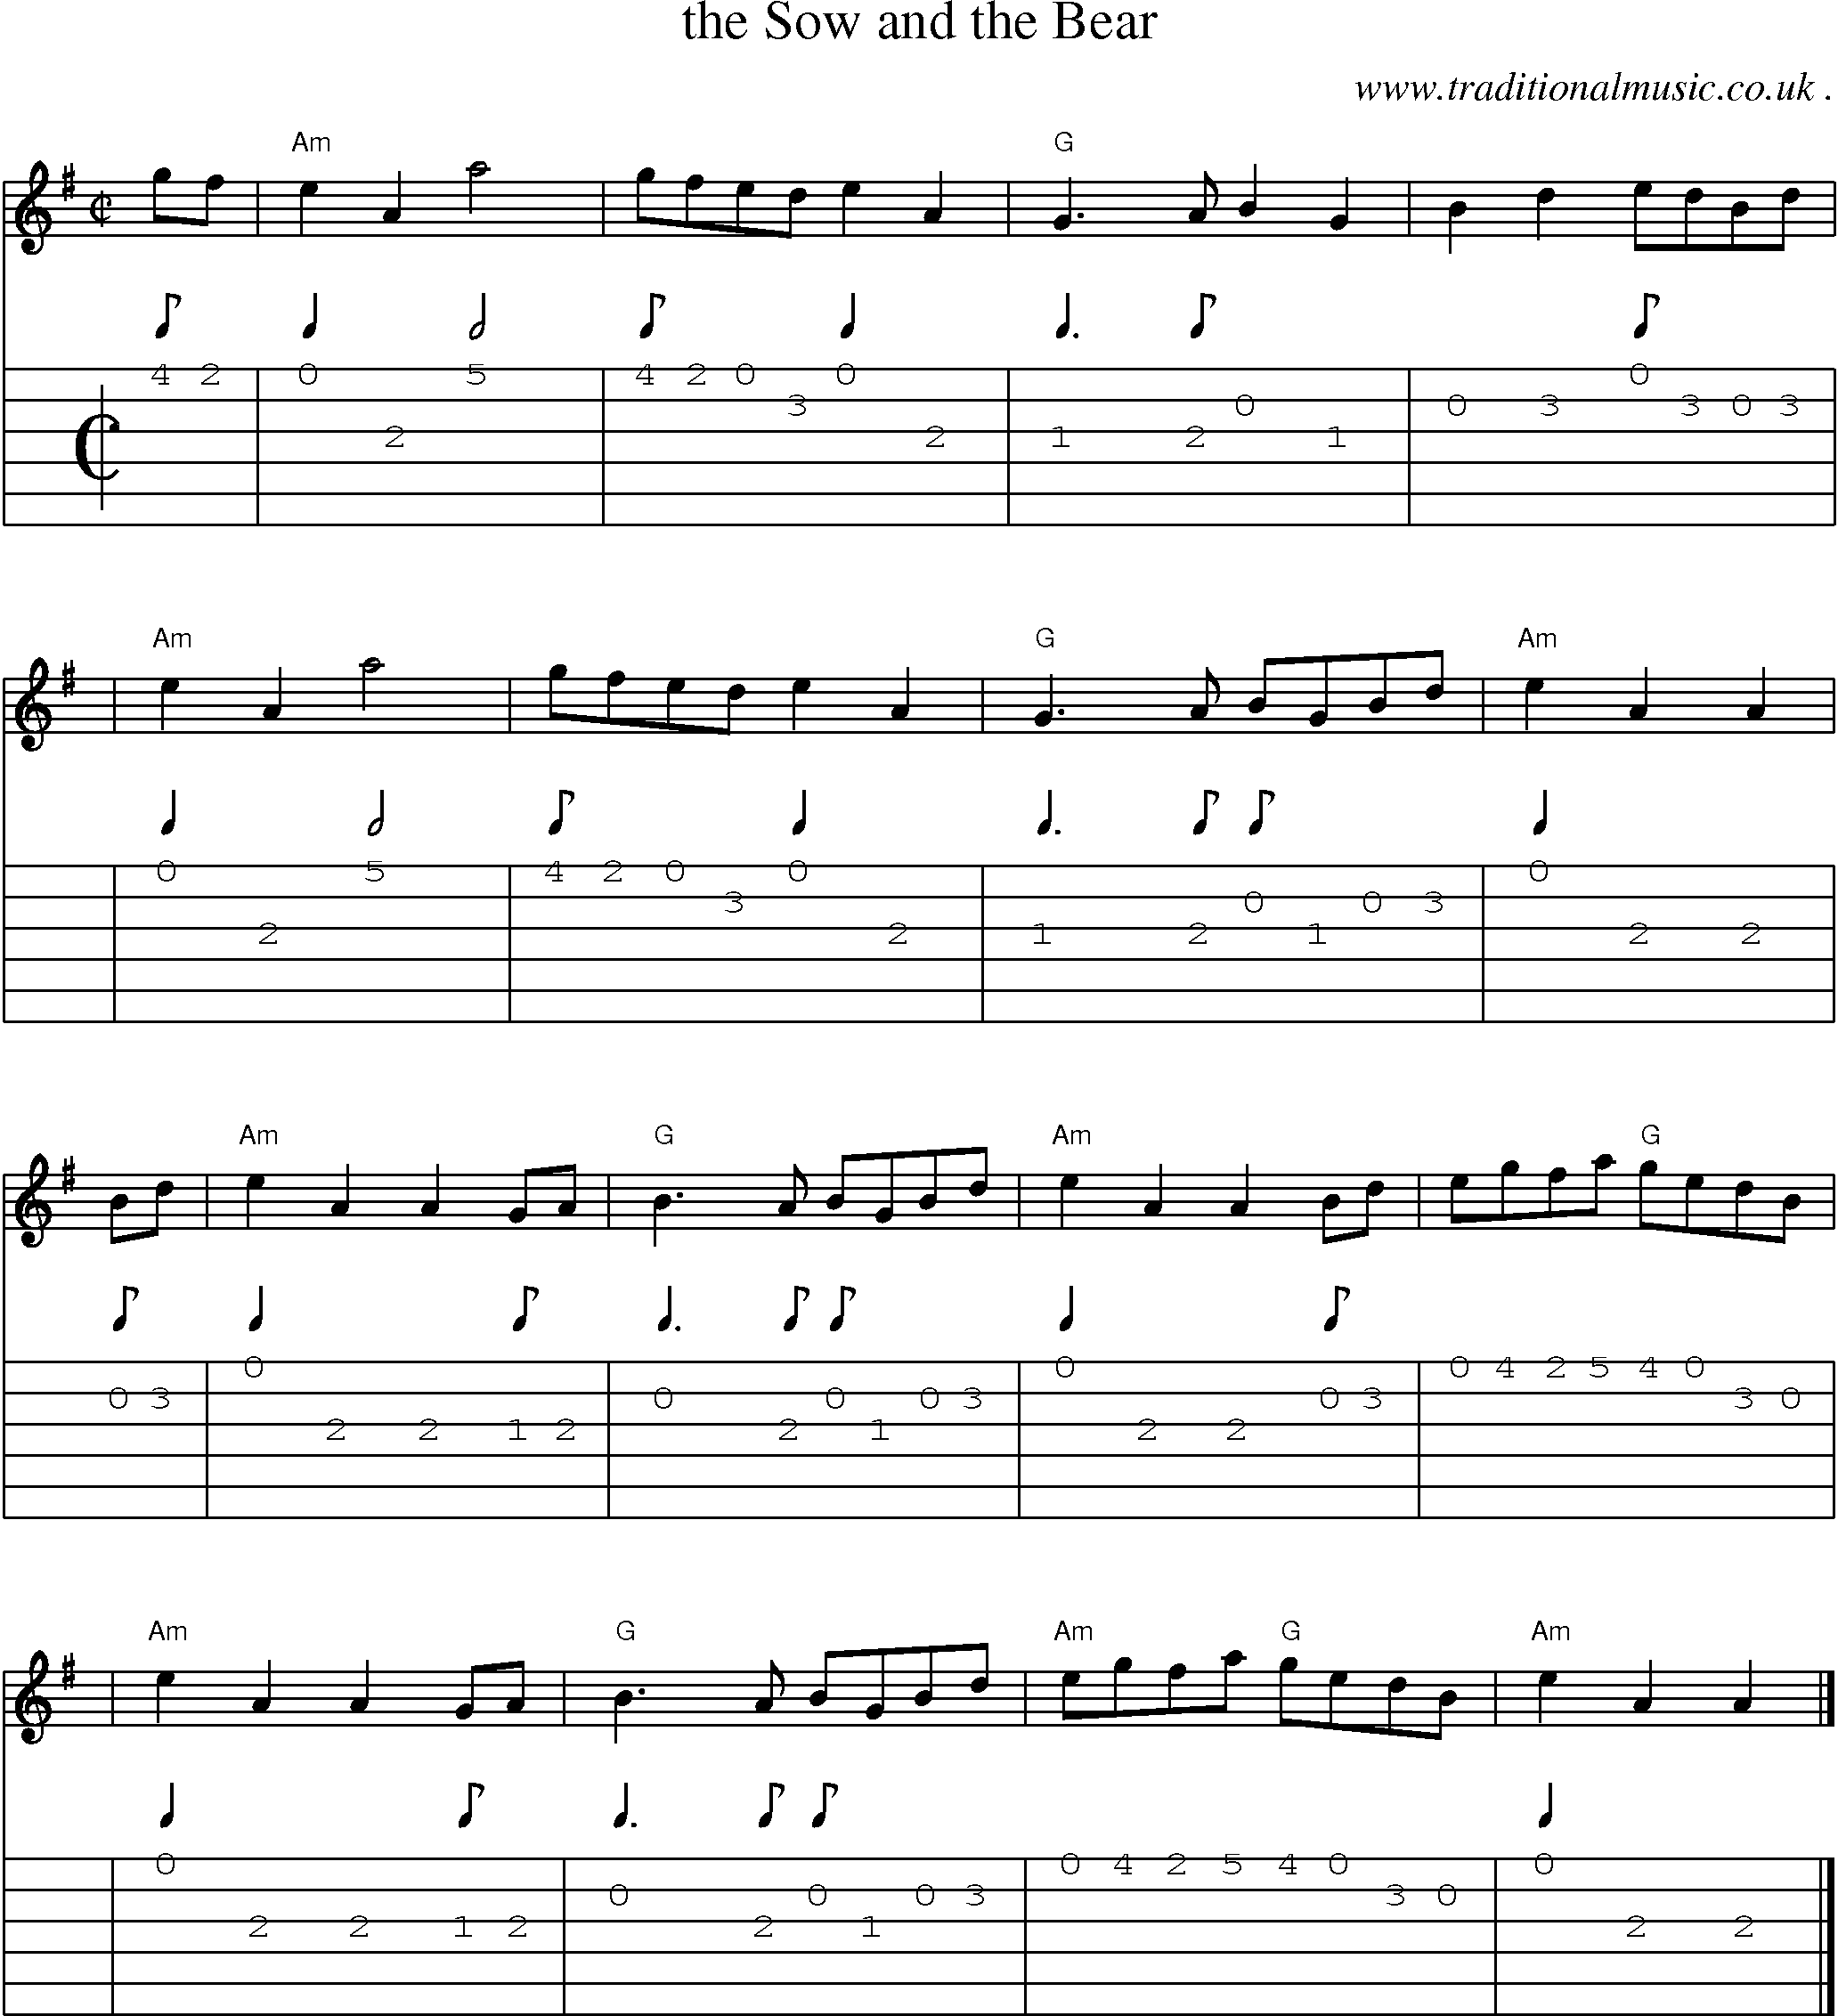 Sheet-music  score, Chords and Guitar Tabs for The Sow And The Bear